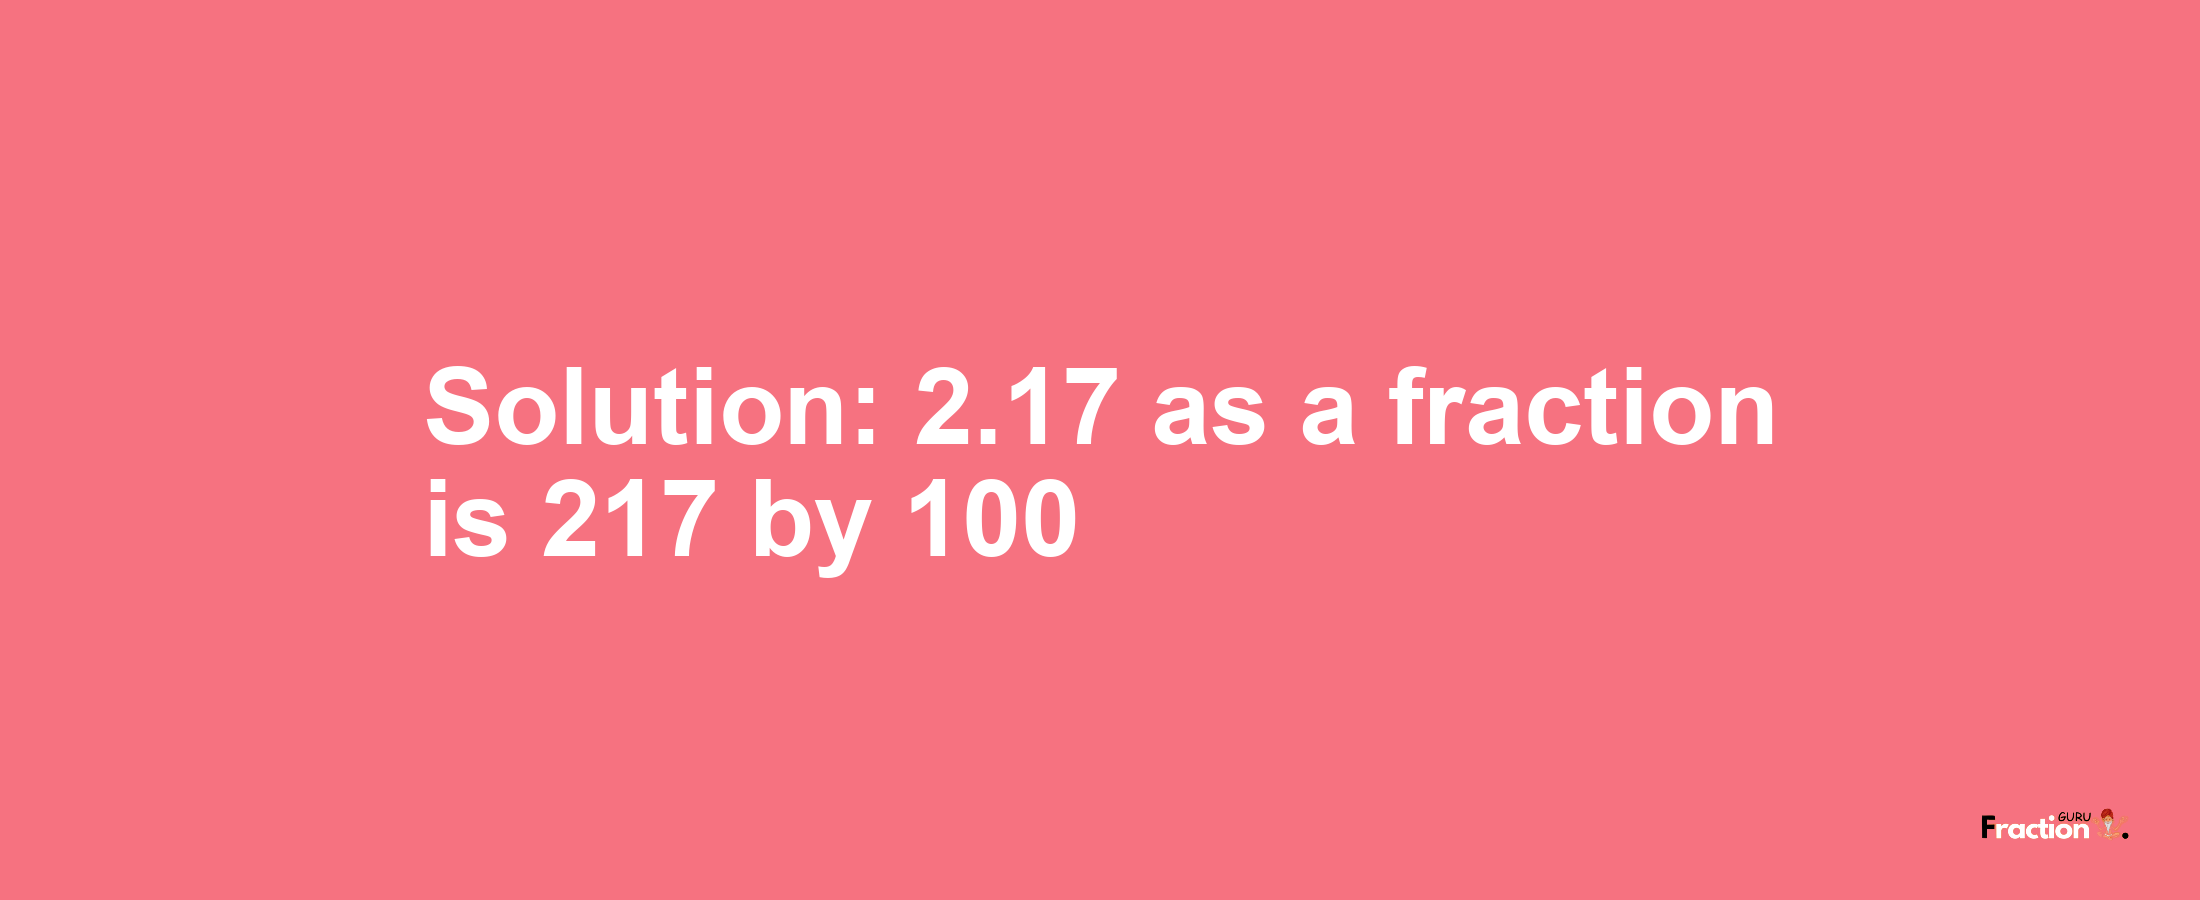 Solution:2.17 as a fraction is 217/100